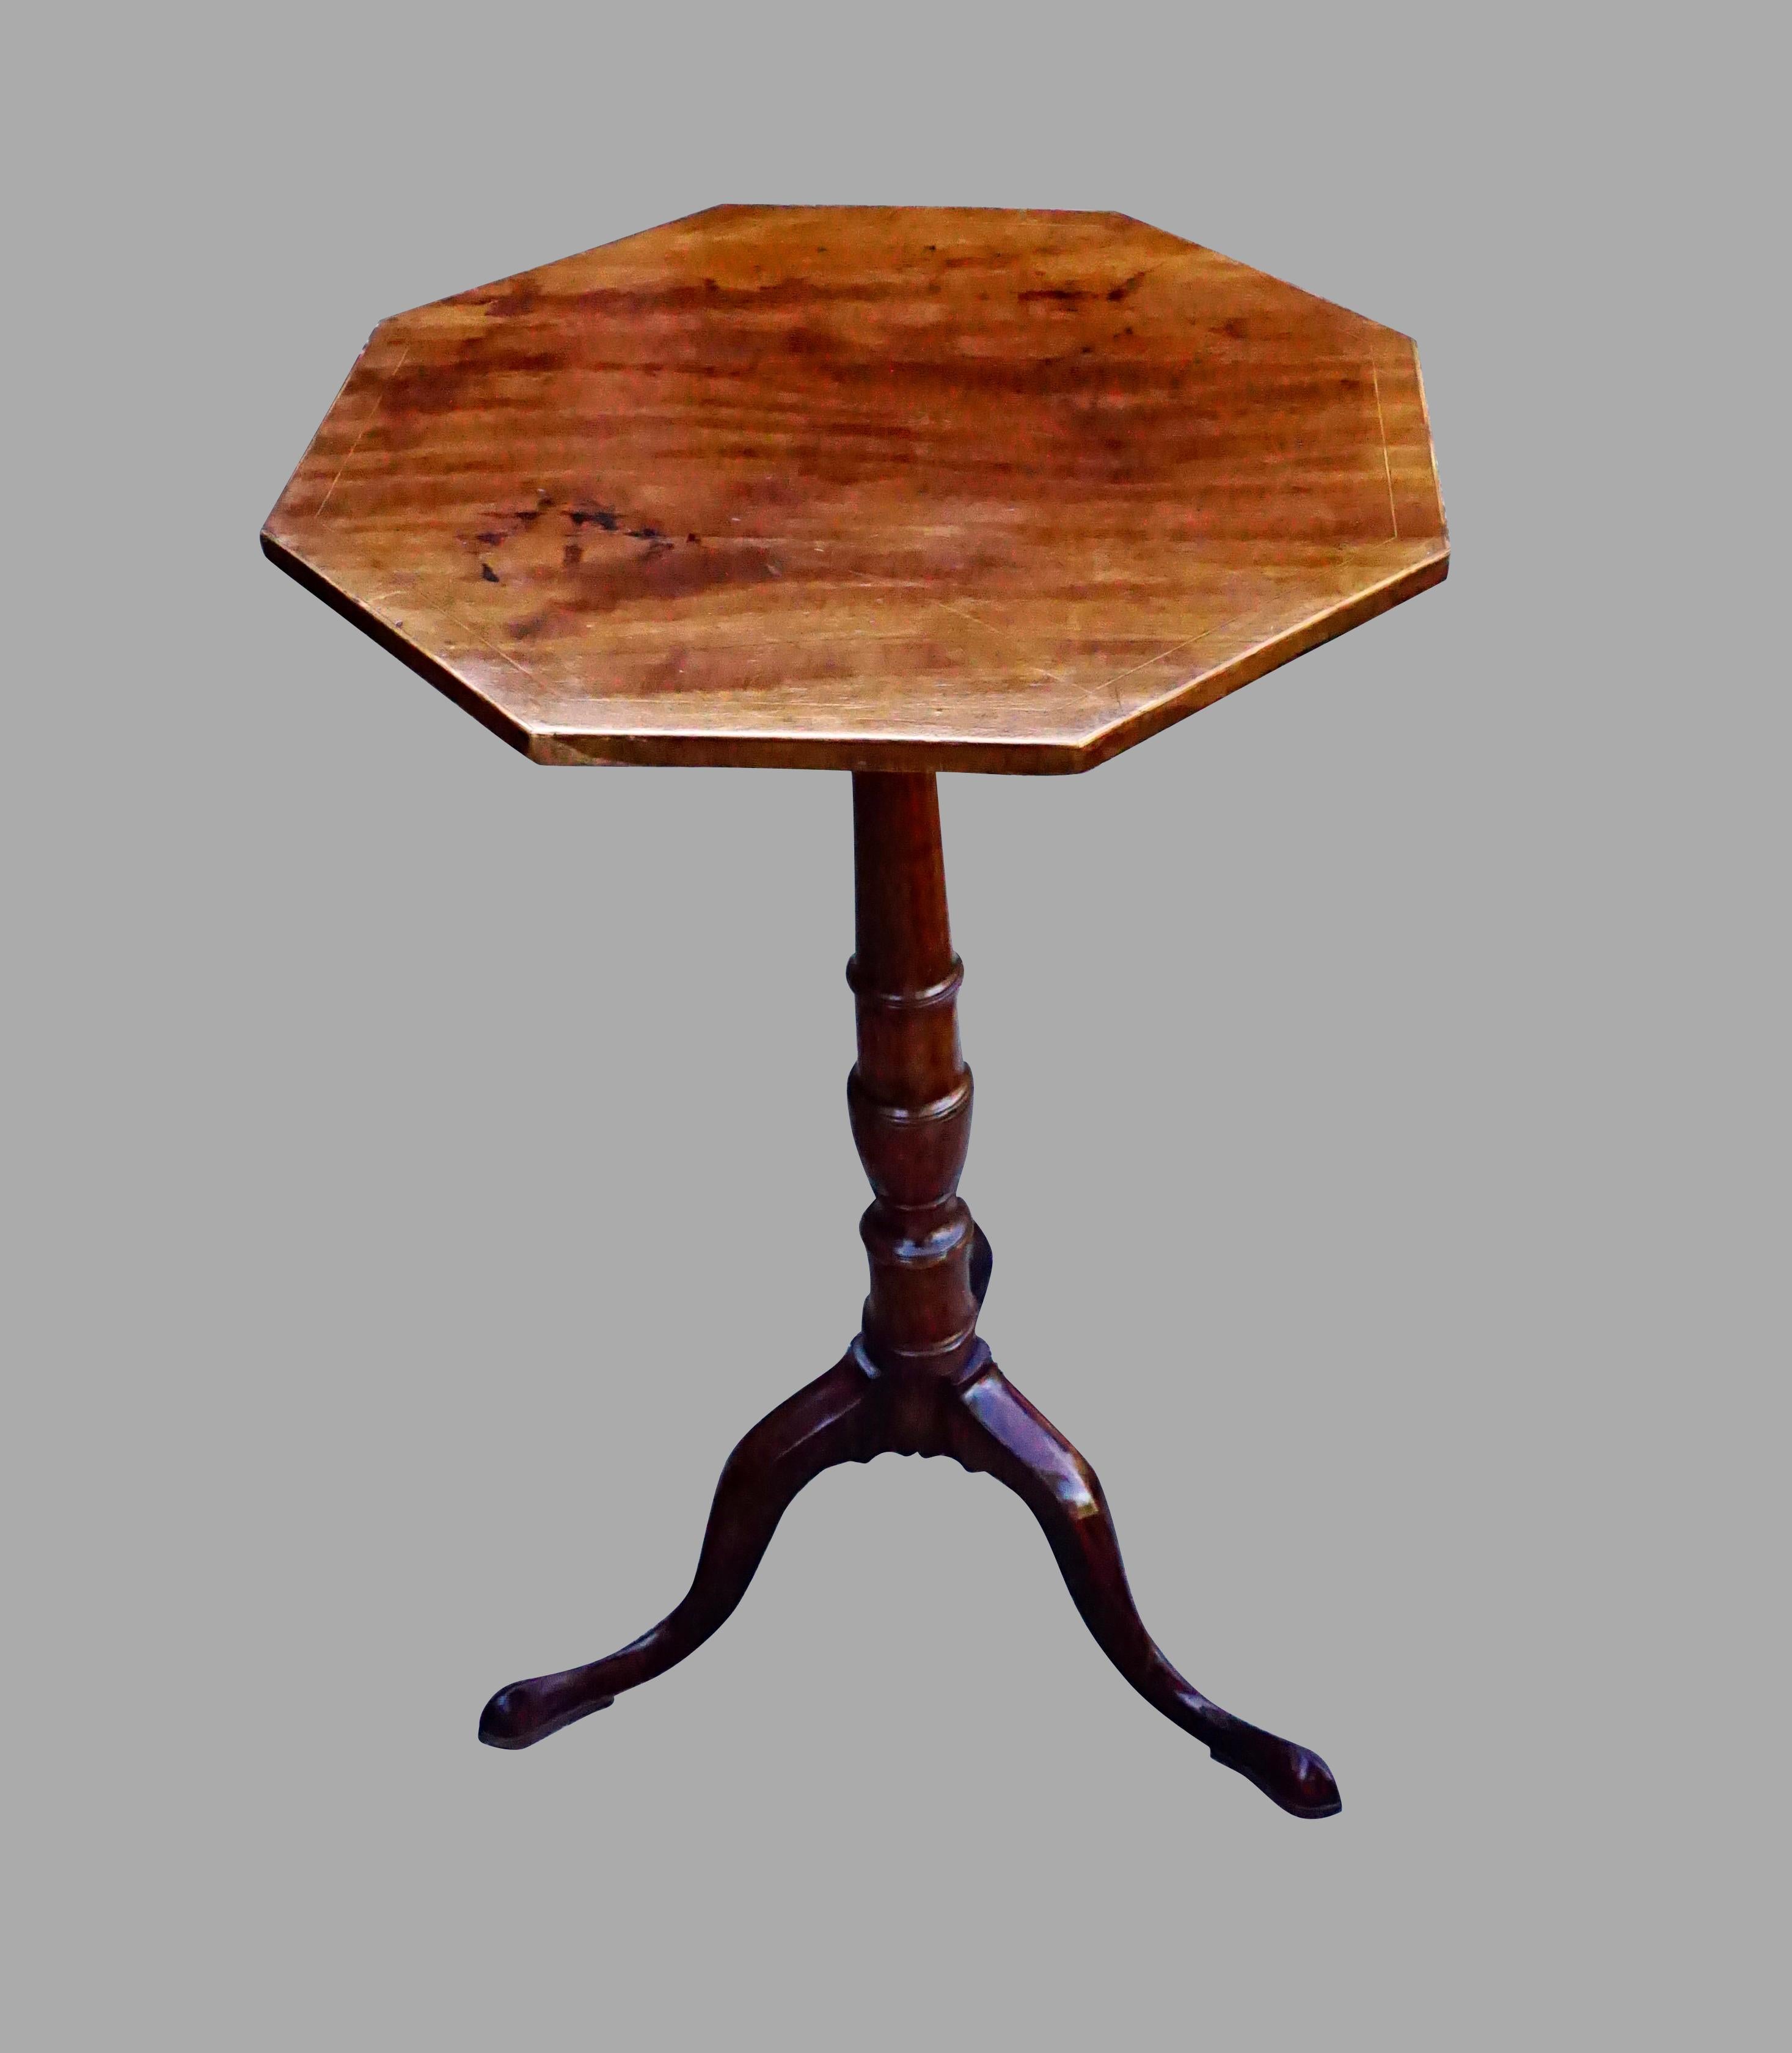 A charming English George III period inlaid mahogany tripod candle stand, the string inlaid hexagonal top supported on a turned column, terminating in a tripod base with cabriole legs ending in pad feet. Circa 1770. Attractive warm color, top with